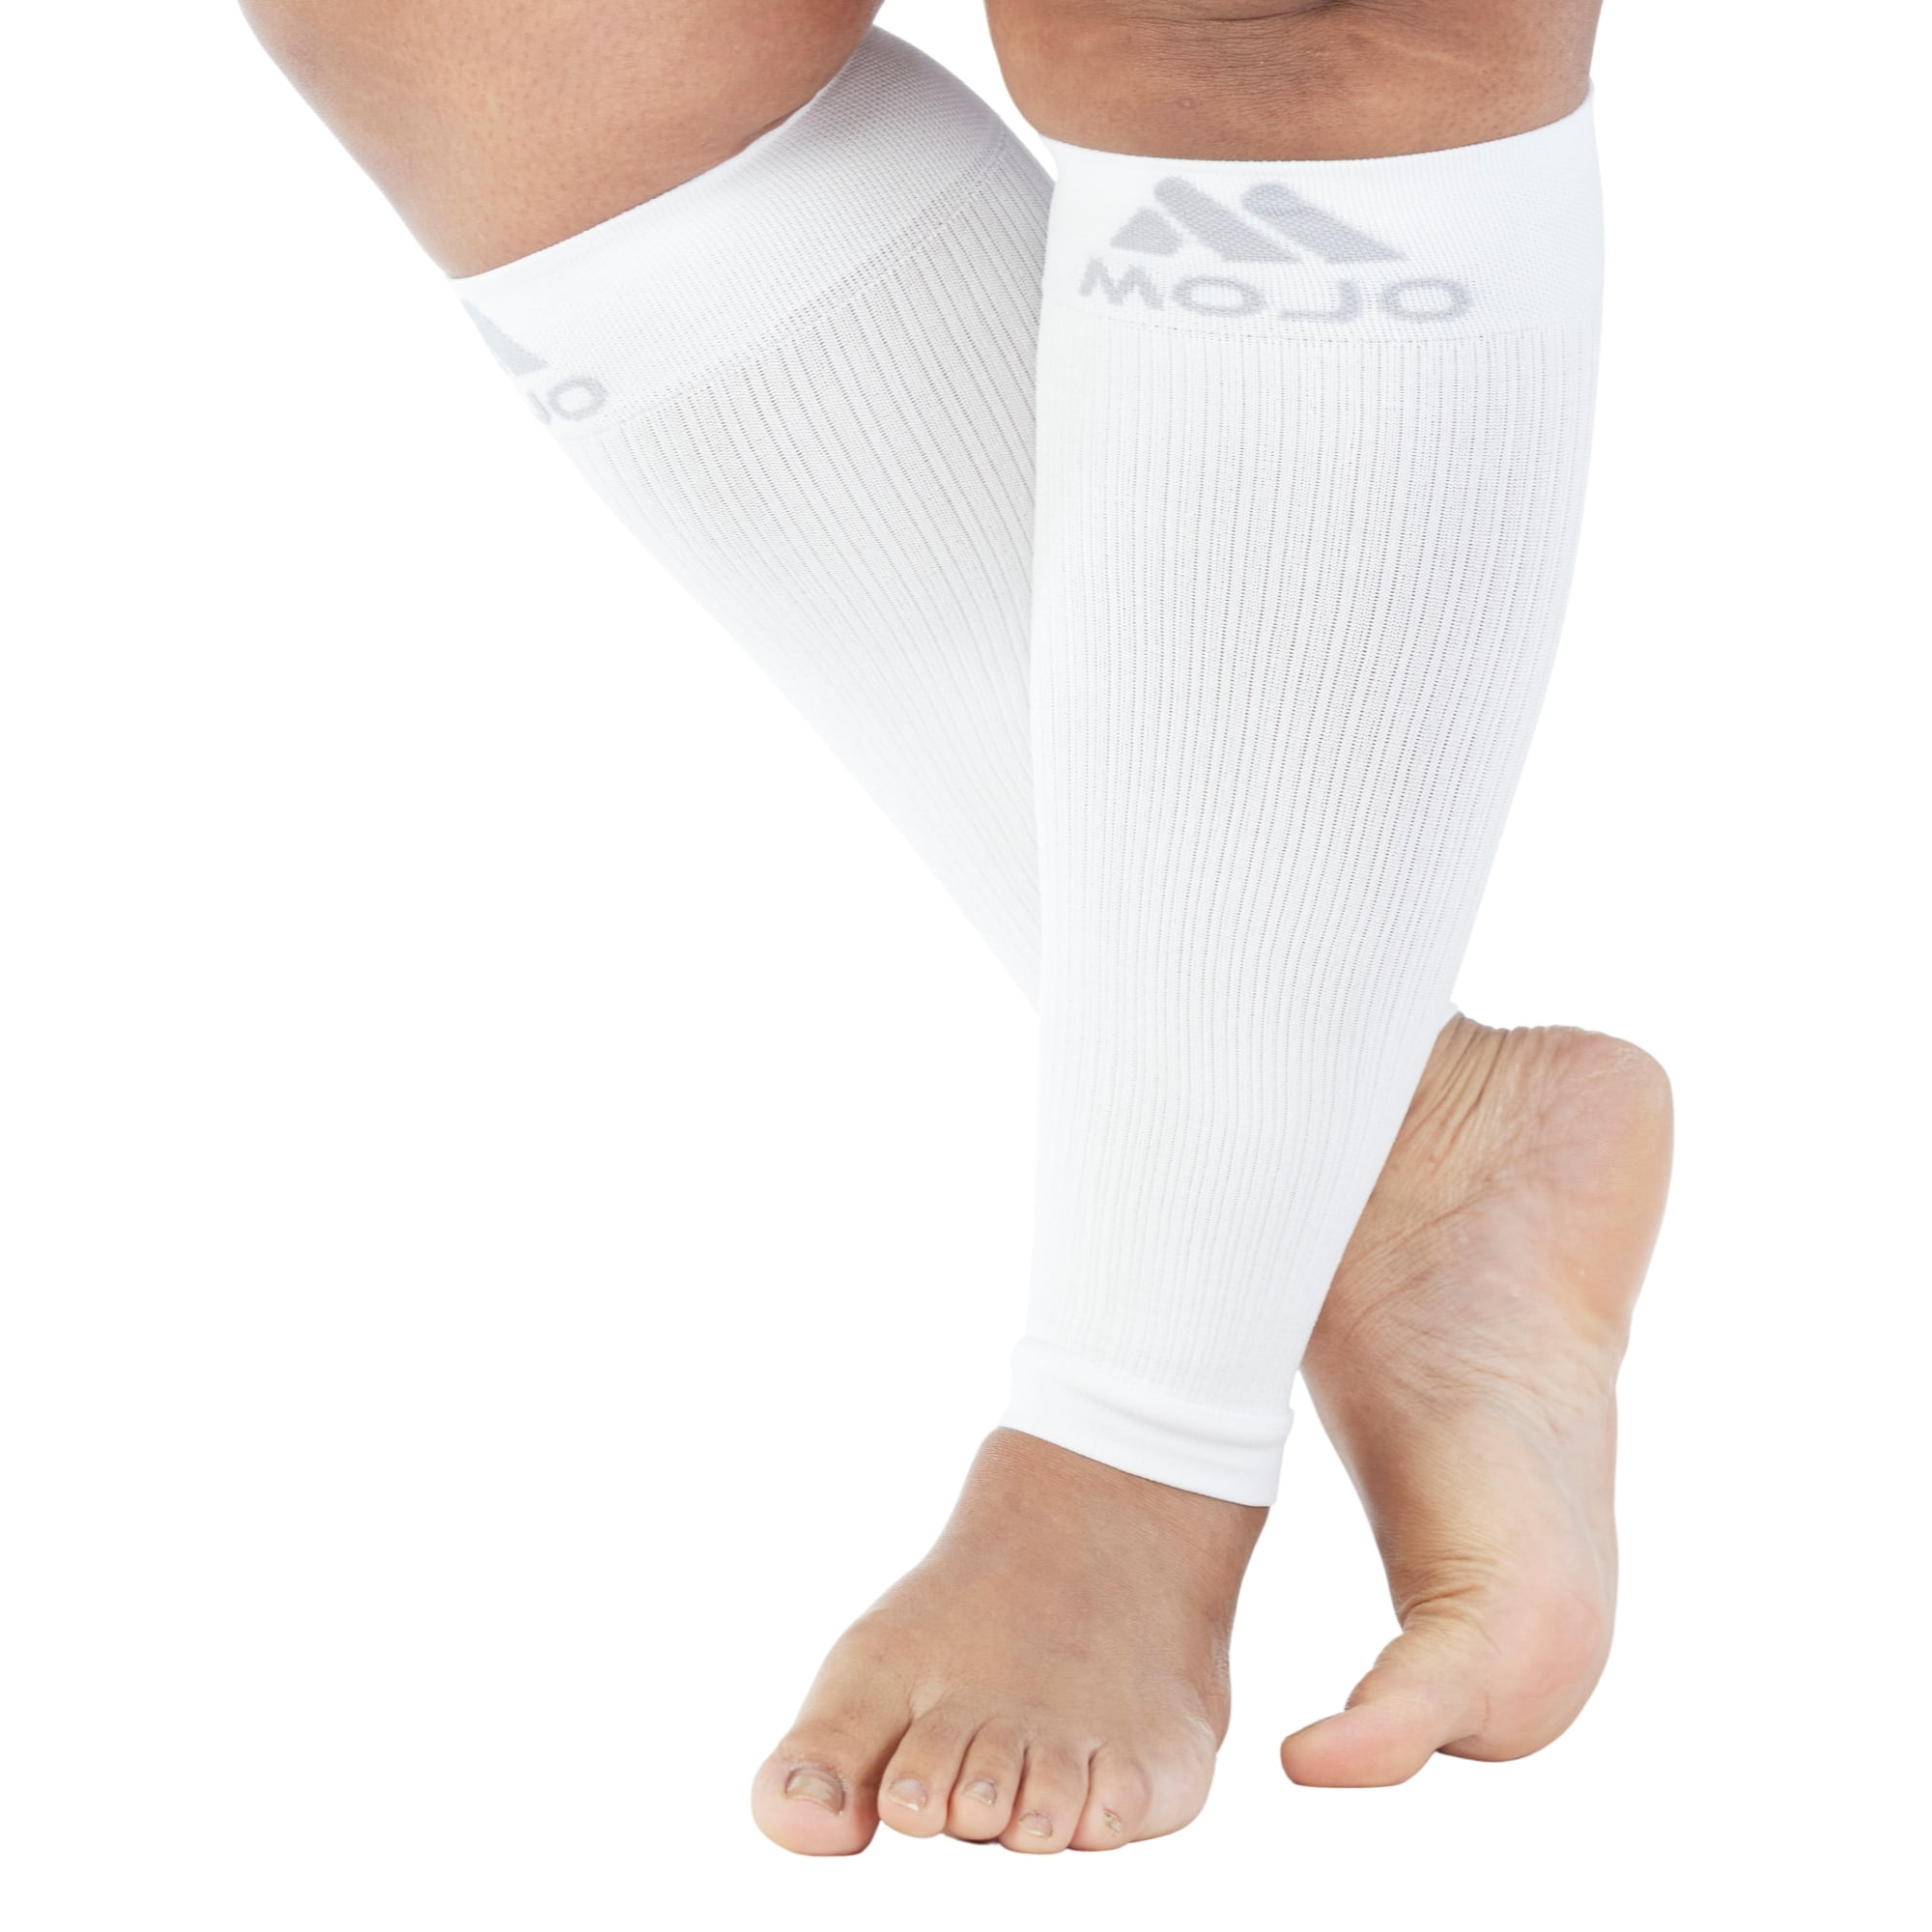 Extra Wide Unisex Compression Calf Sleeve 20-30mmHg for Edema - White,  4X-Large